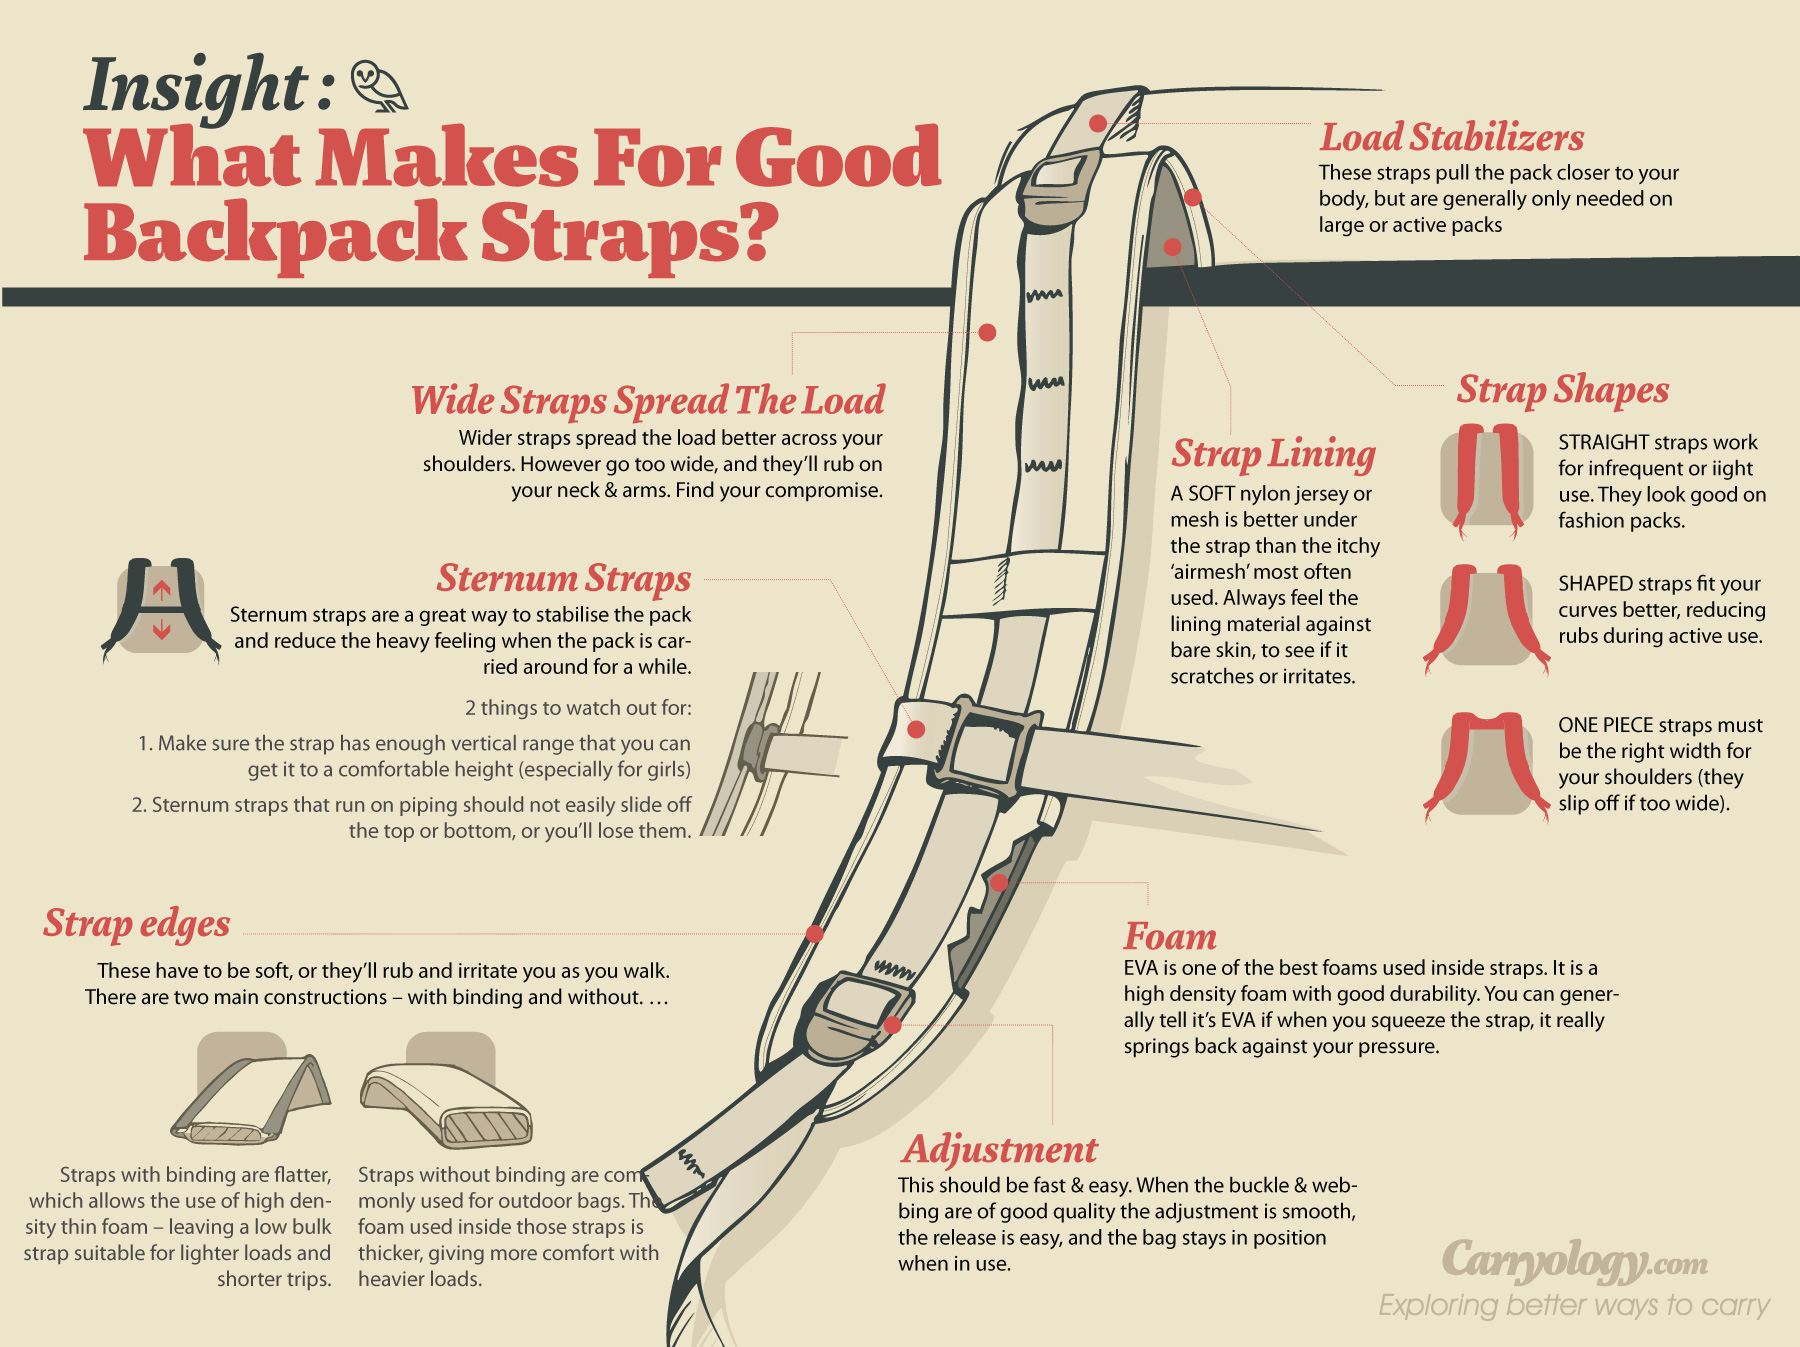 What Makes a Good Backpack Strap? - Carryology